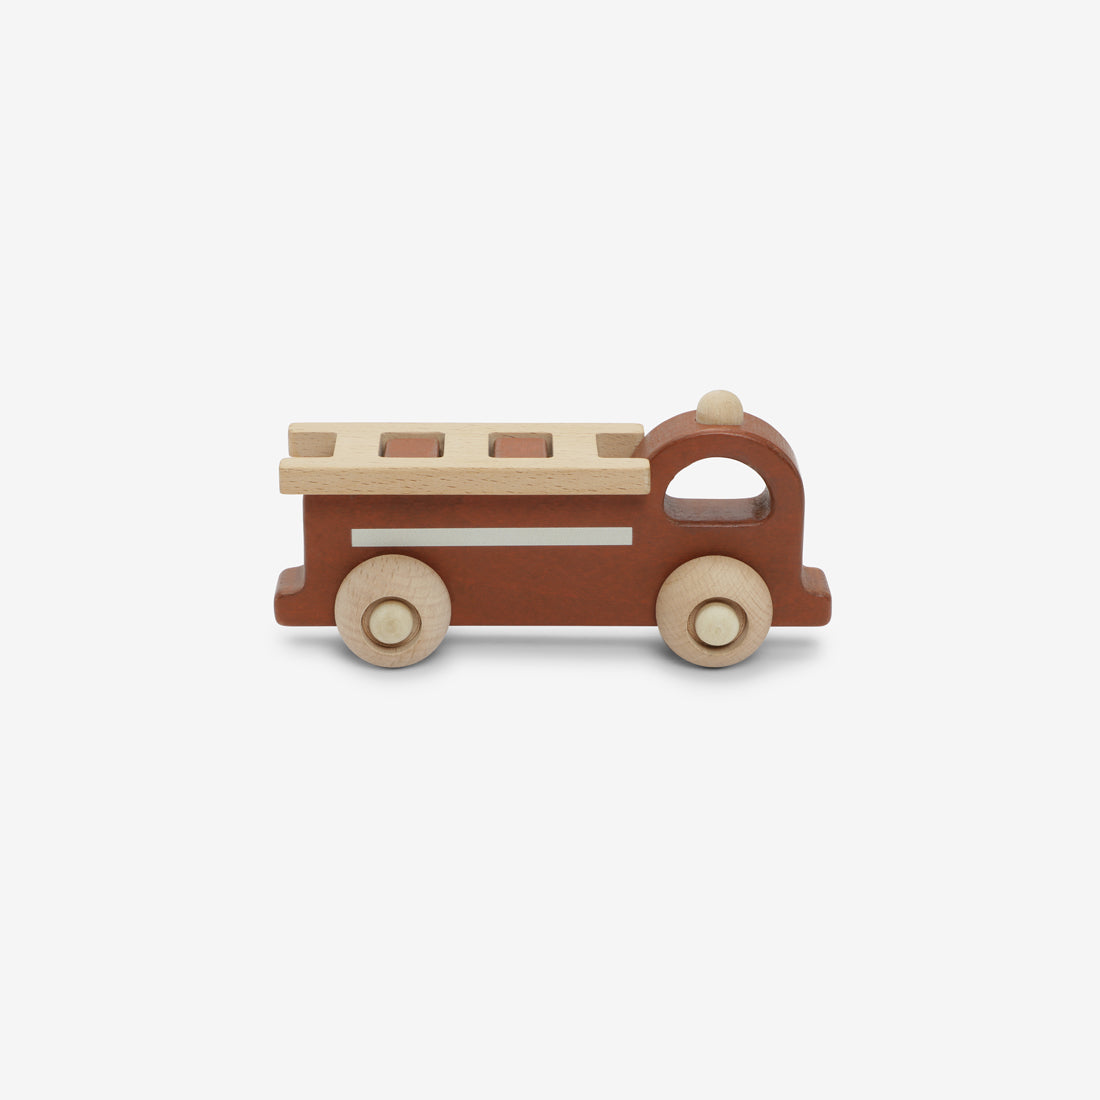 Hardwood Rolling Toy Fire Engine